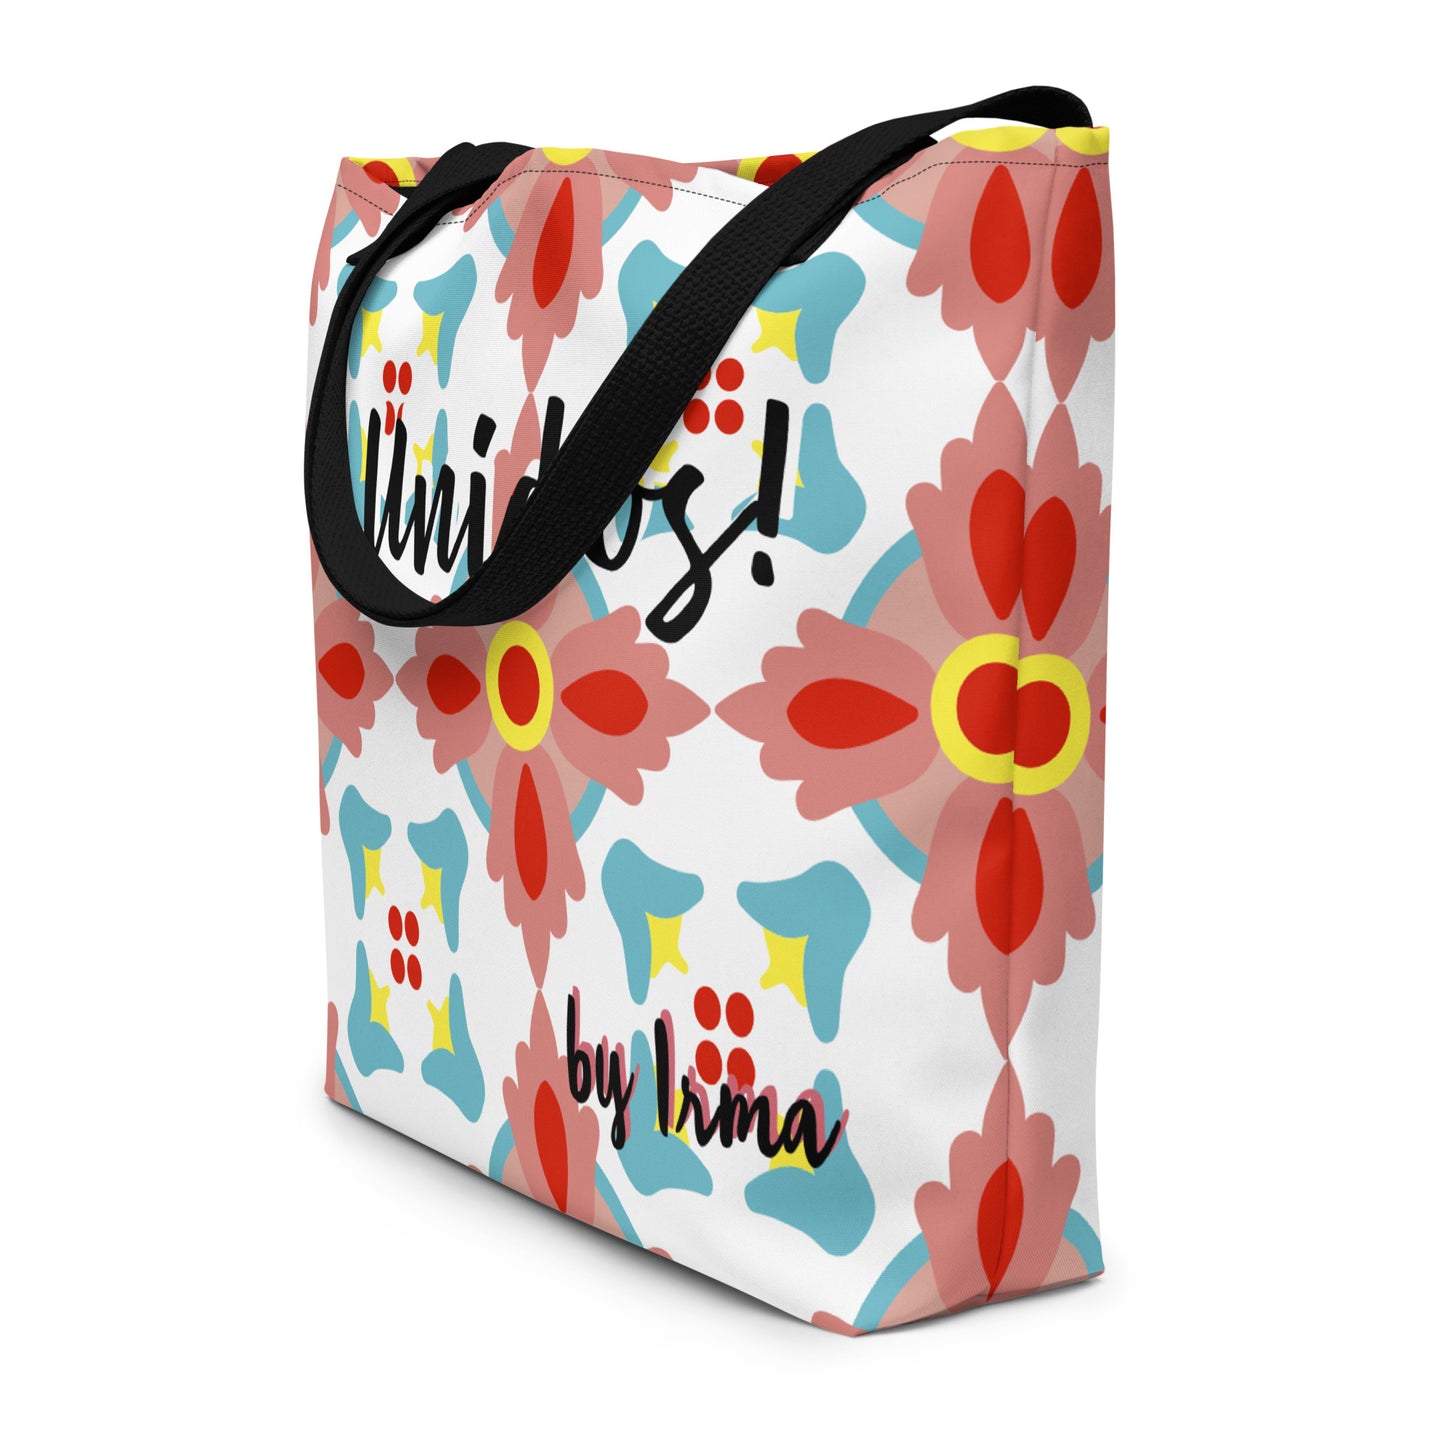 Unidos by Irma All-Over Print Large Tote Bag